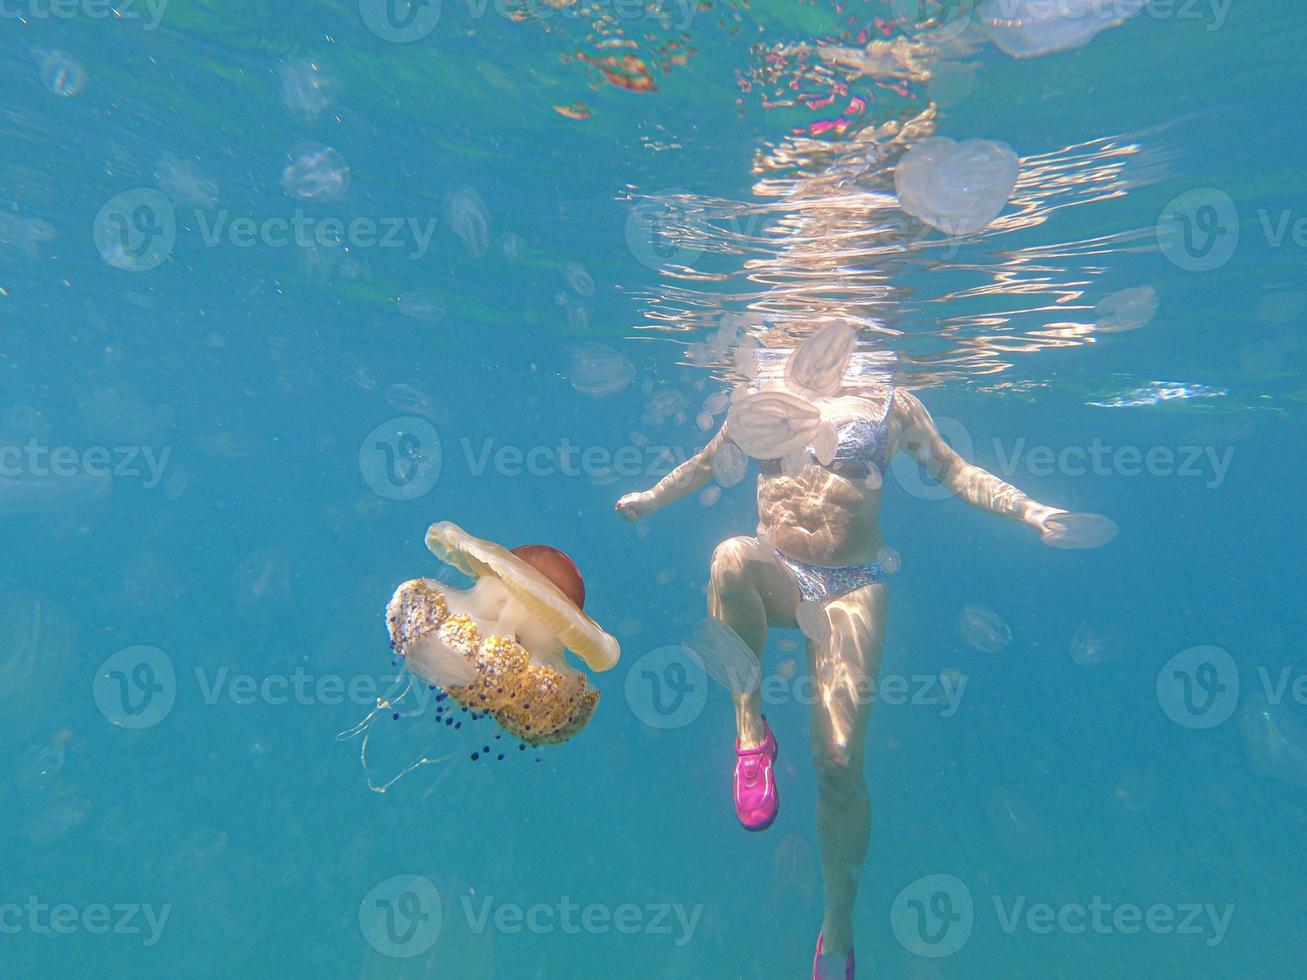 Colored ribbed jellyfish comes dangerously close to a swimmer photo